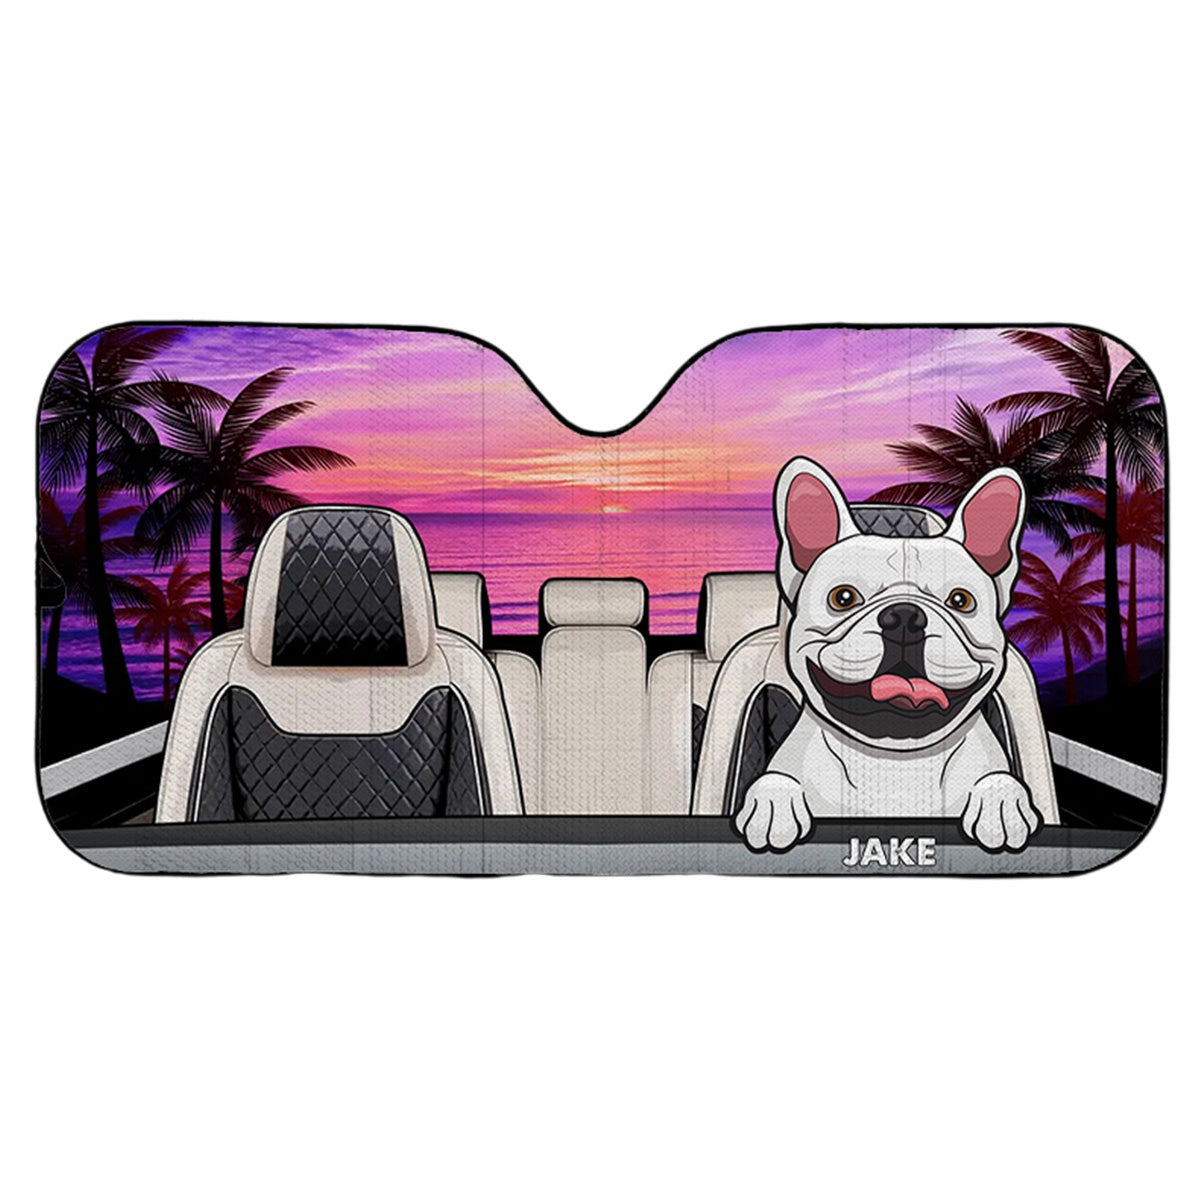 The Journey Of Life Is Sweeter When Traveled With A Dog - Dog & Cat Personalized Windshield Sunshade, Car Window Protector